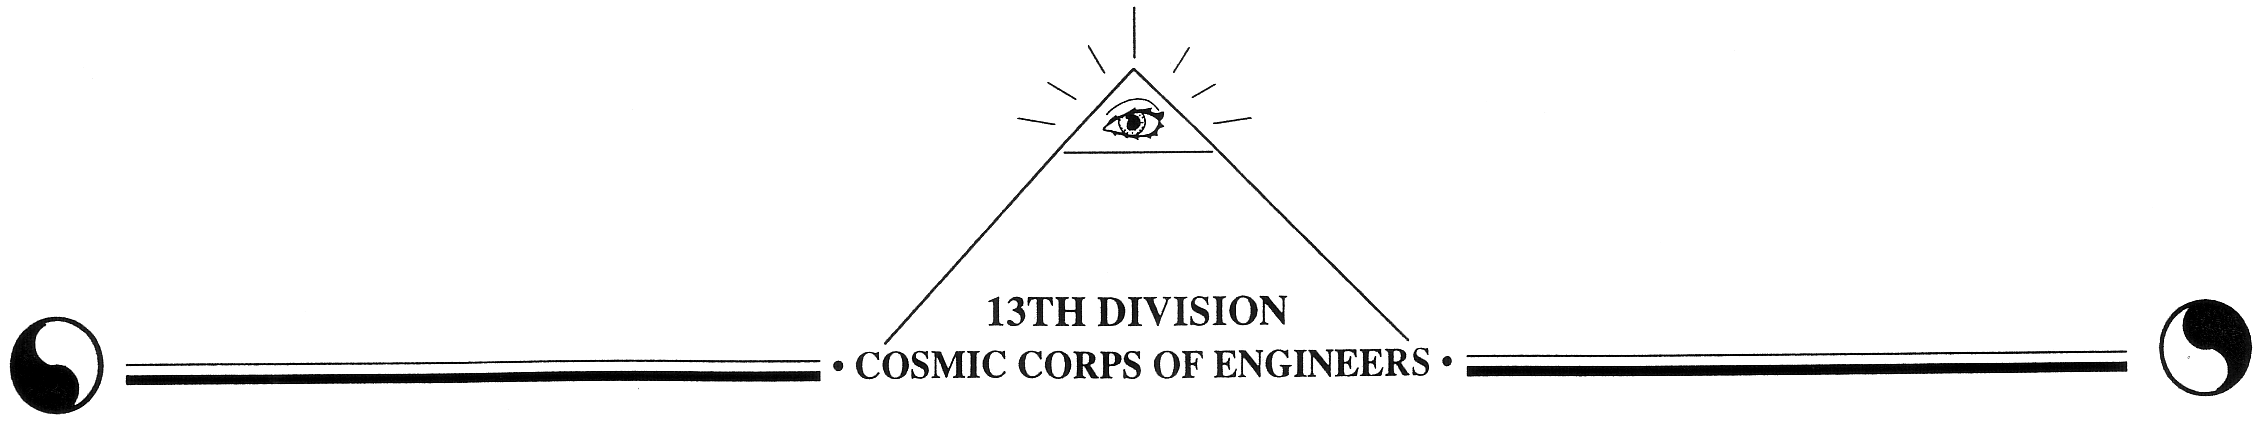 13th Division - Cosmic Corps pf Engineers